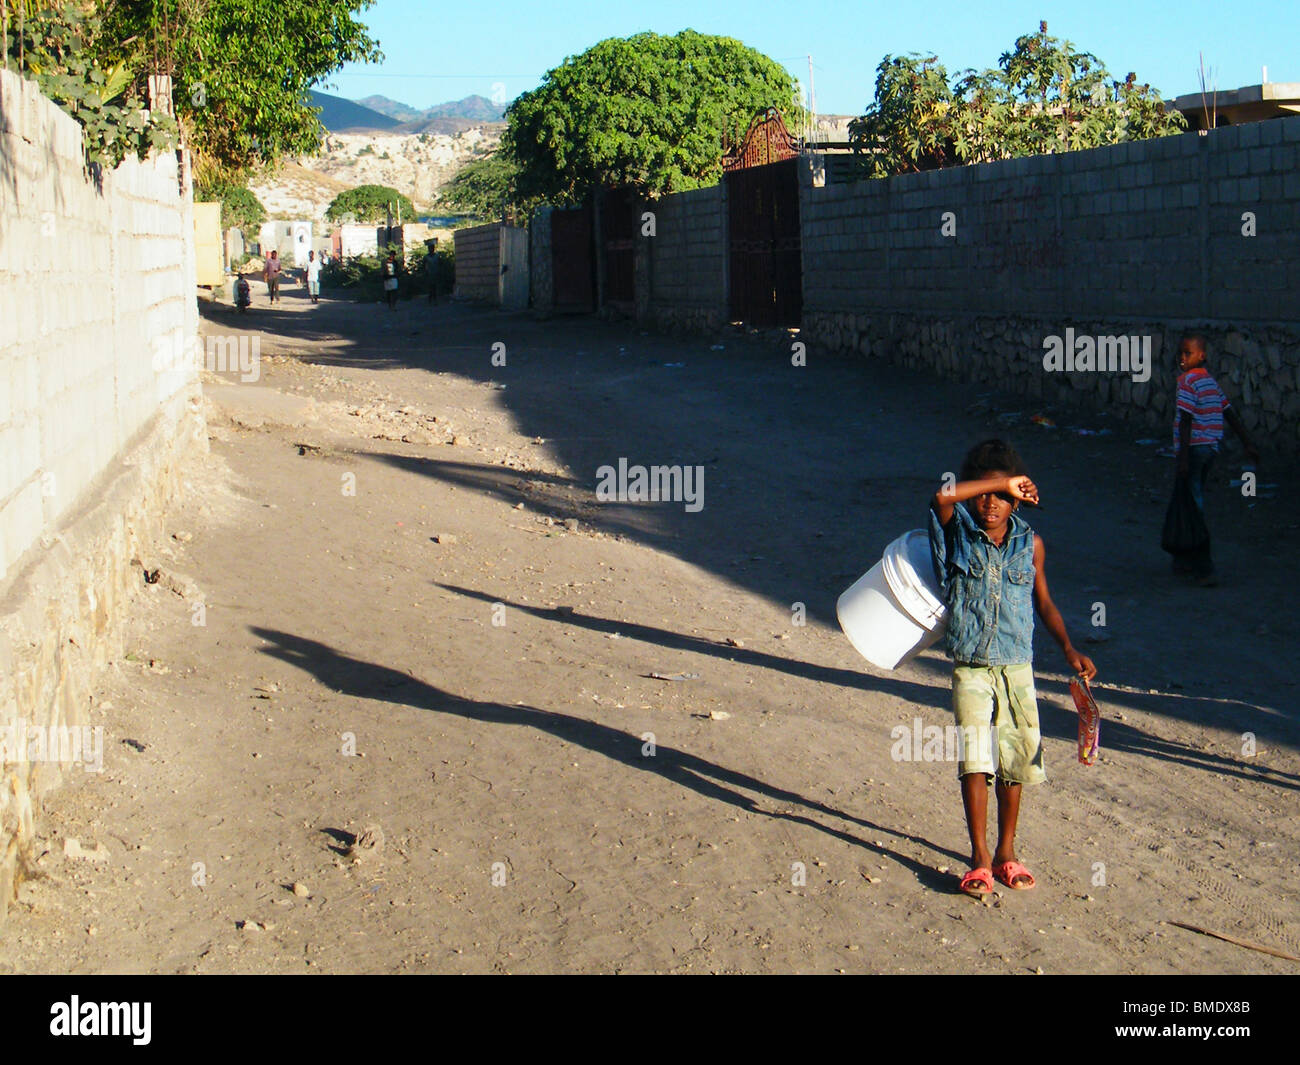 A young girl, sent to collect water, walks down a dusty street in Gonaives, Haiti Stock Photo